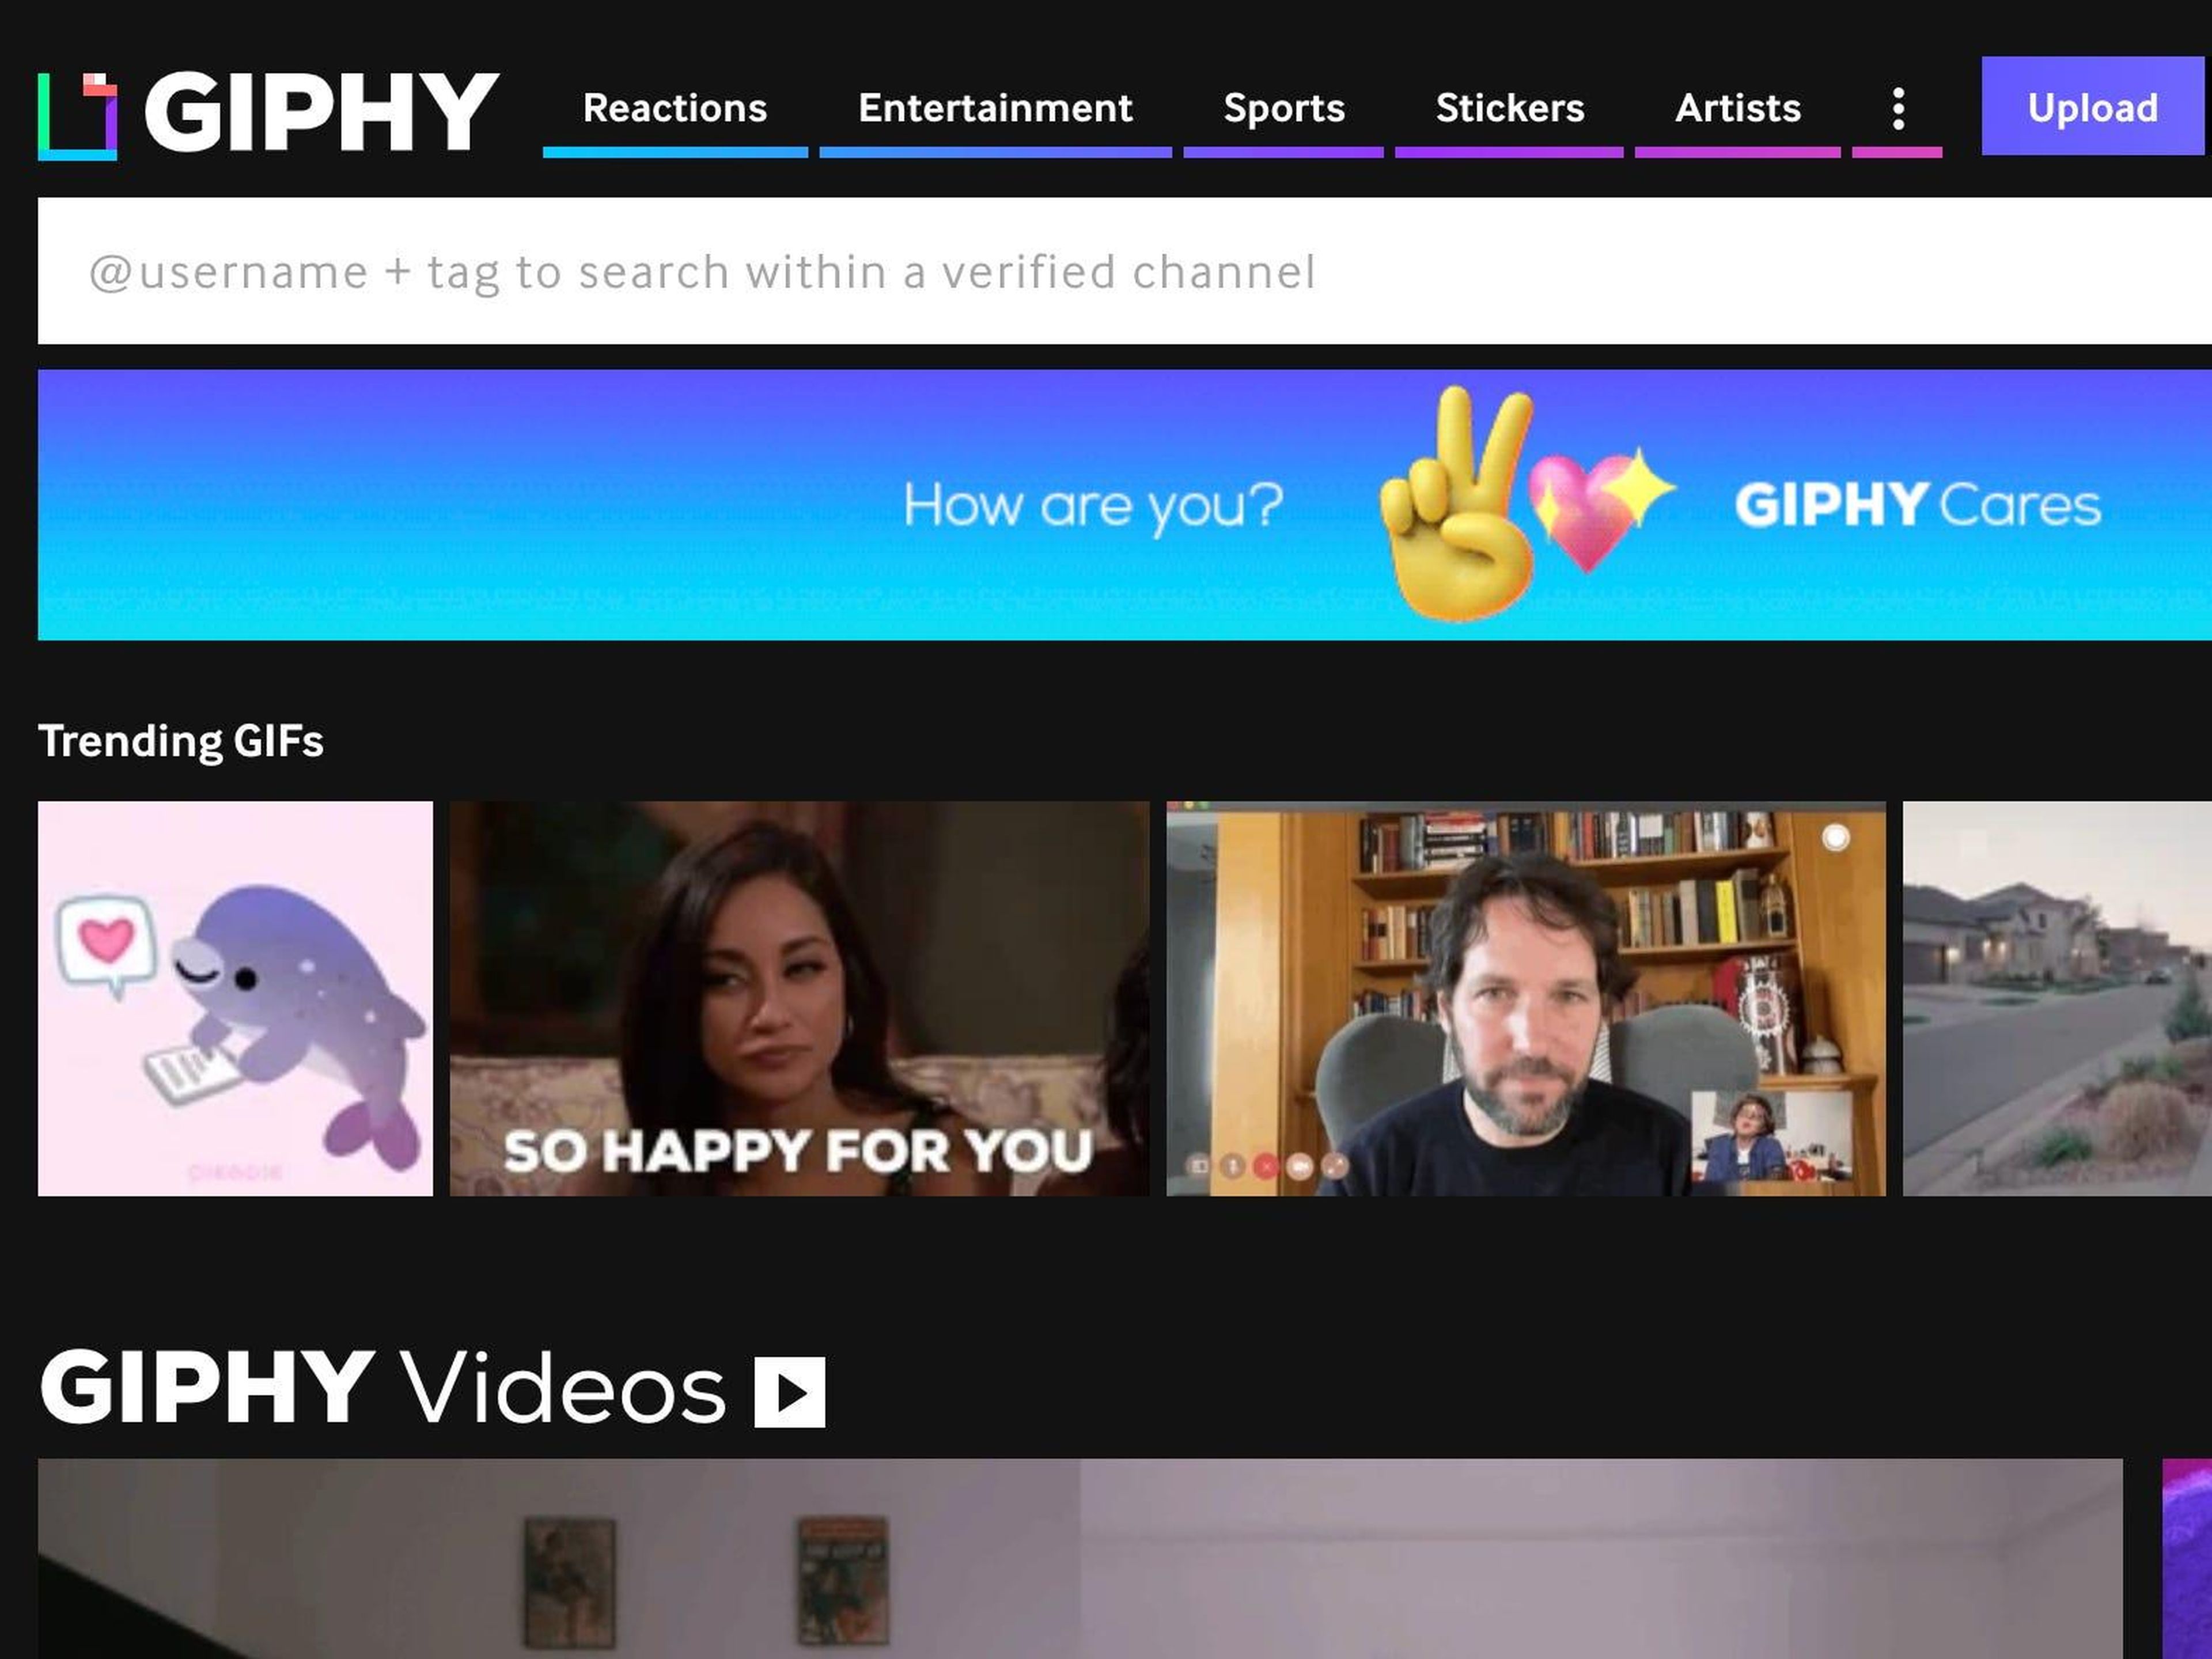 Facebook acquires popular GIF database GIPHY for reported $400 million